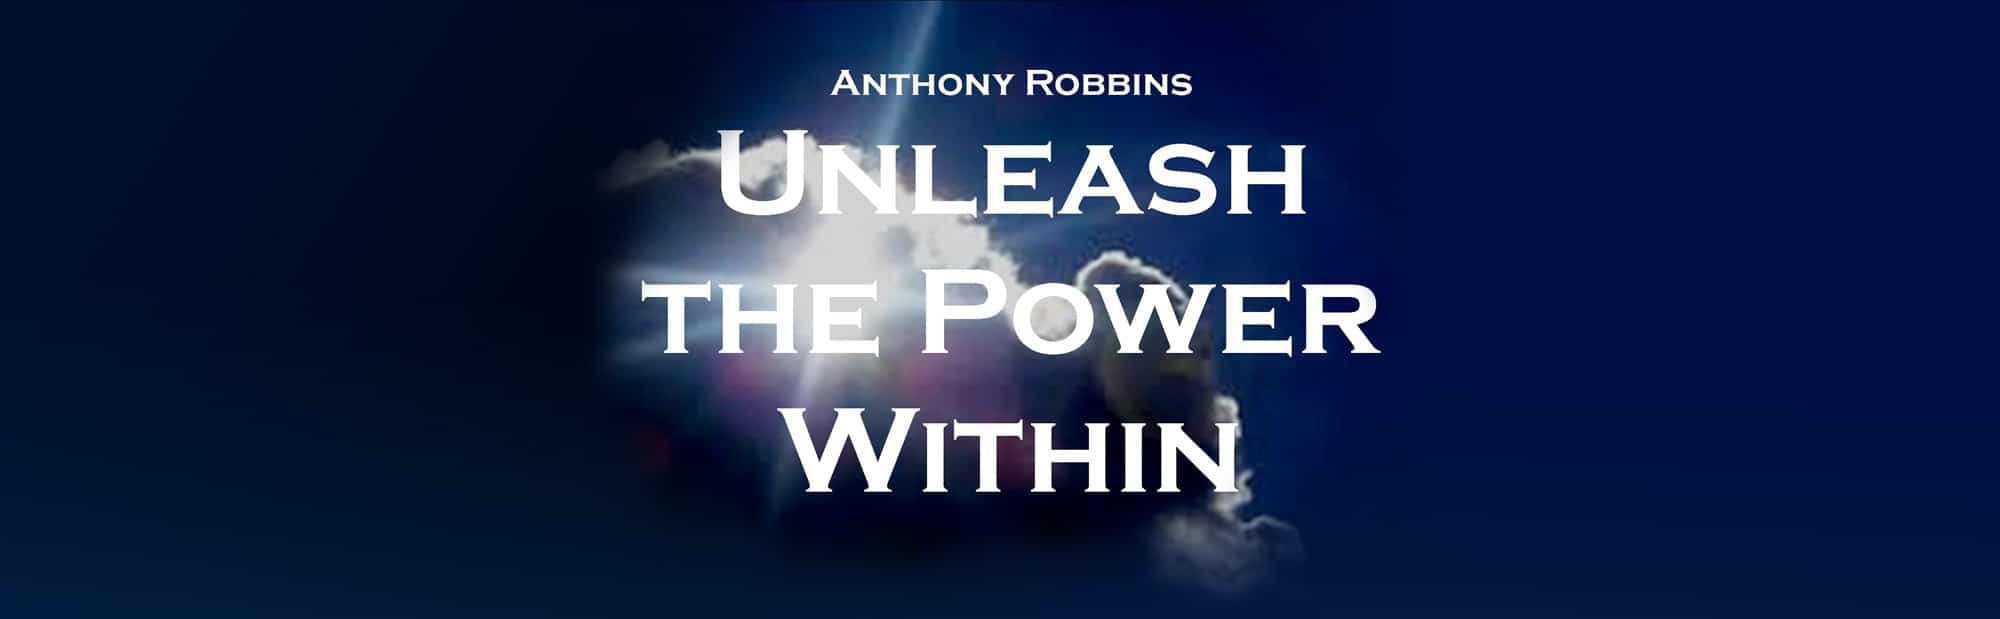 anthony-robbins_unleash-the-power-within Fitness Man: Unleashing the Ultimate Power within